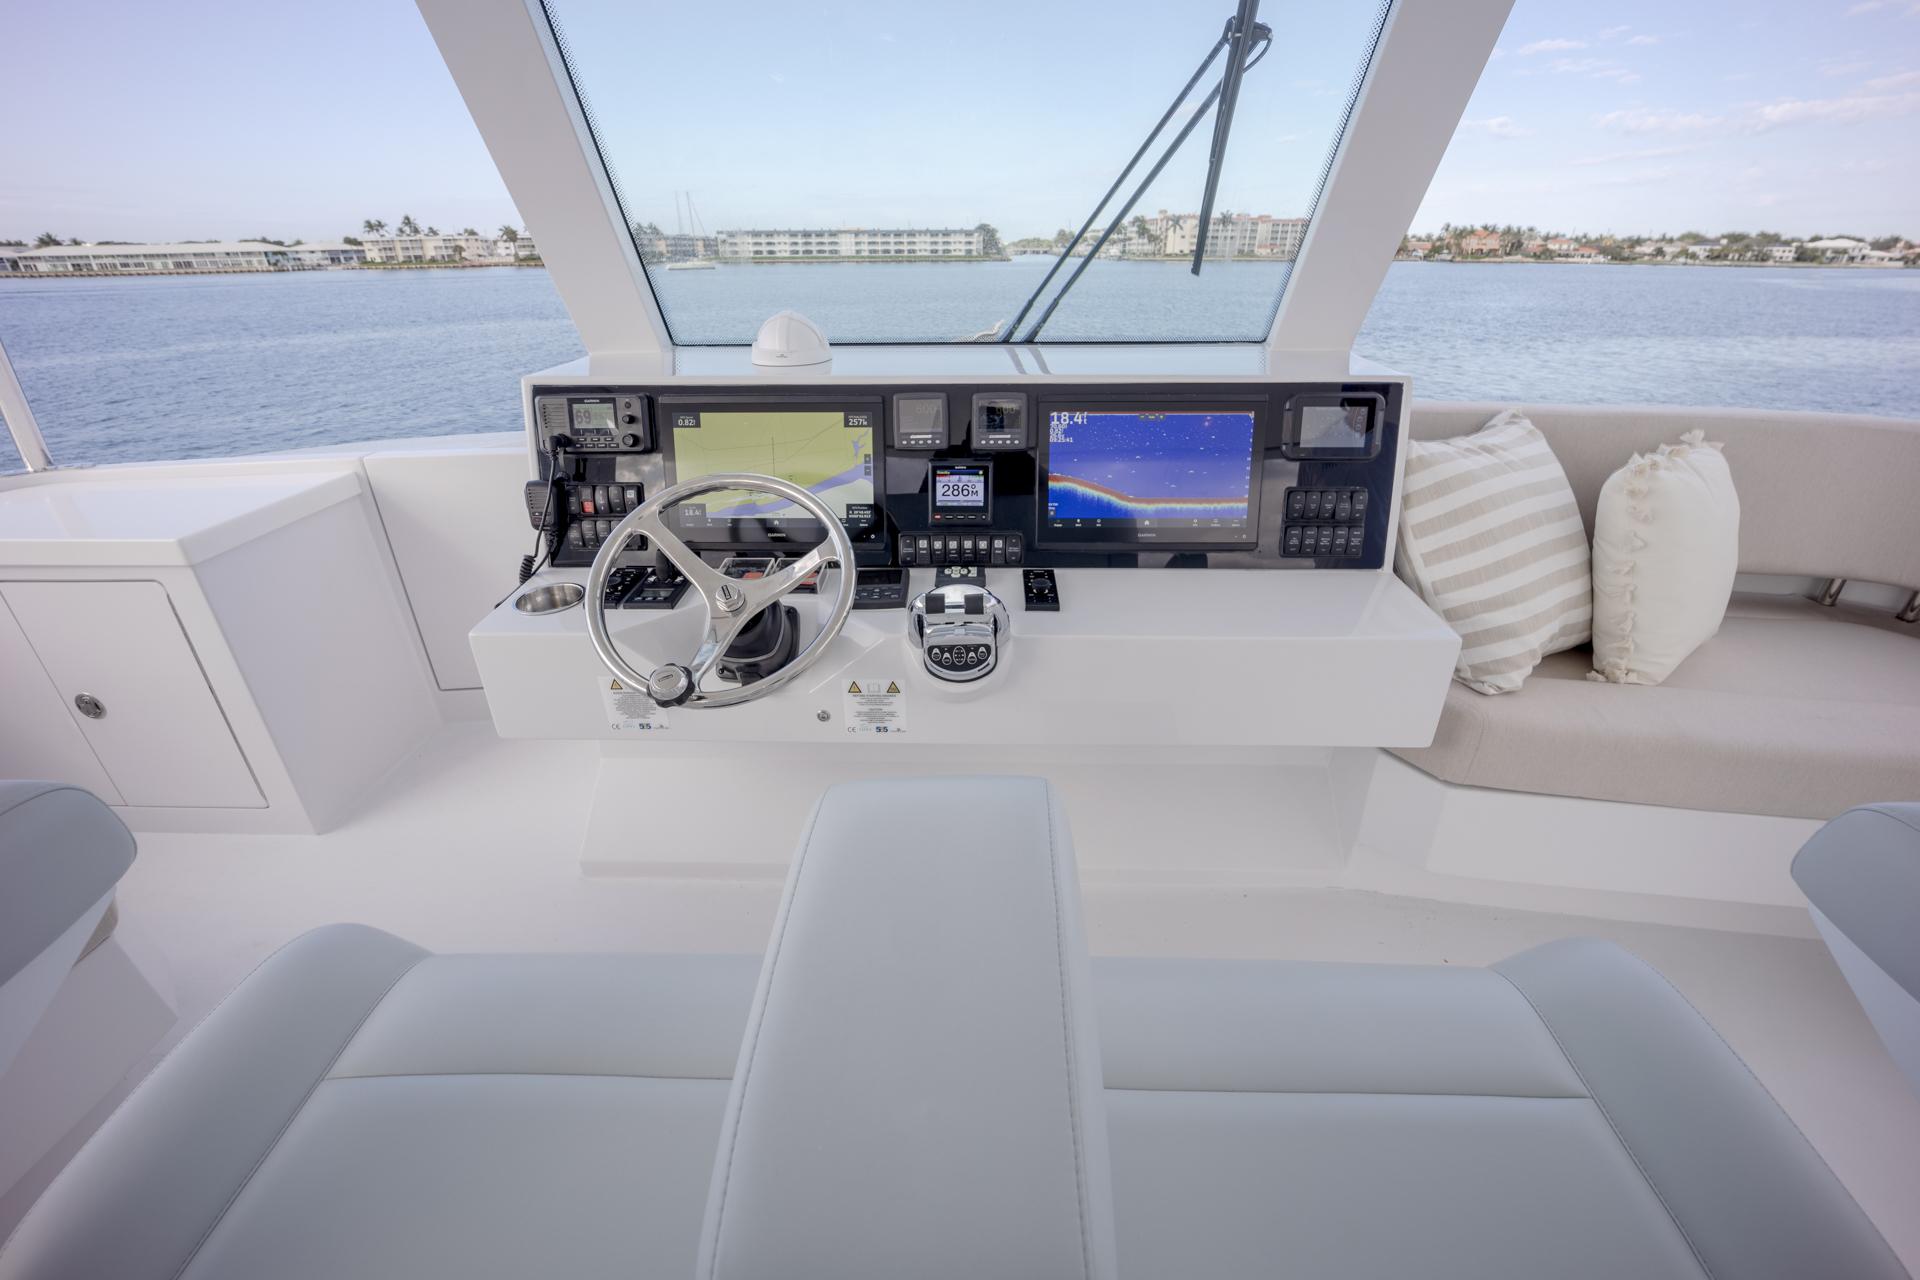 Two Oceans 555 helm console